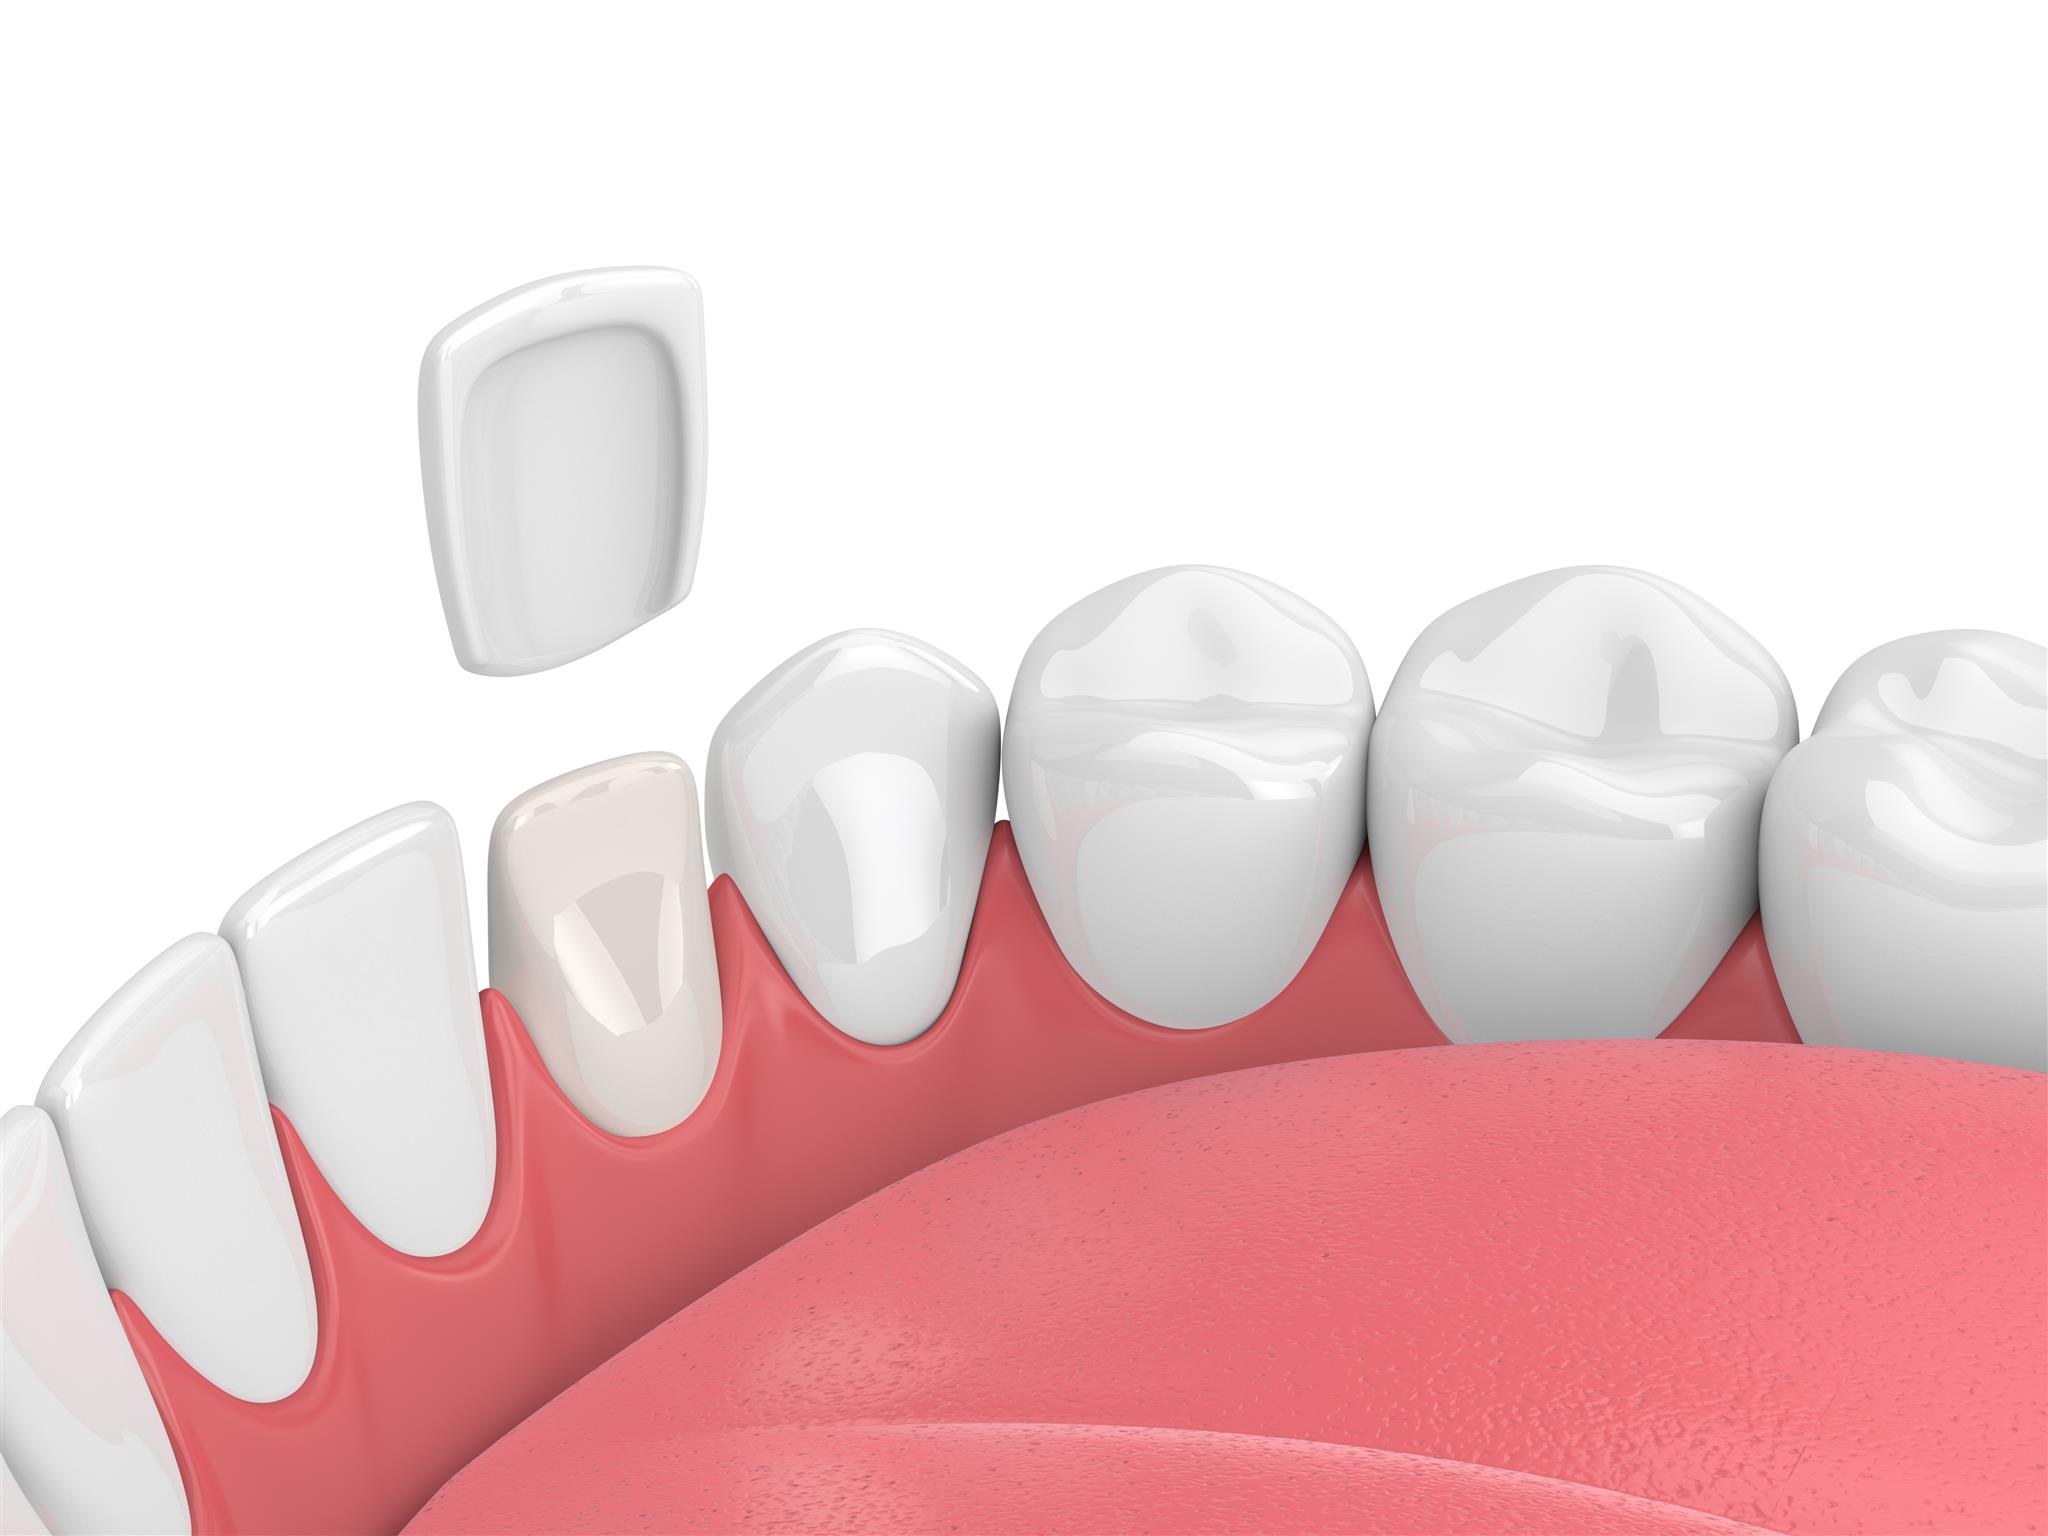 Get the Perfect Smile With Porcelain Veneers!